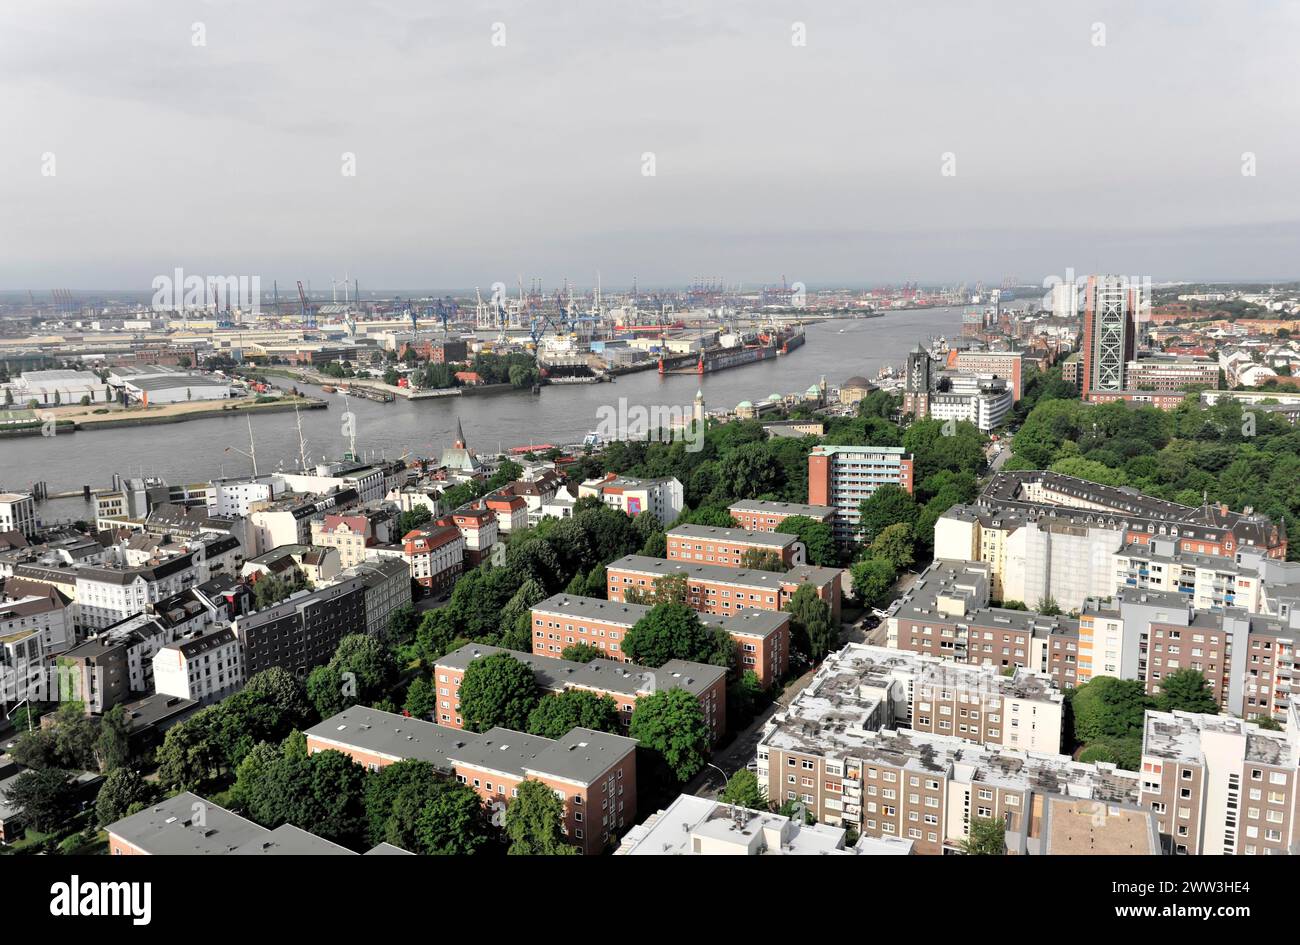 Panoramic view of a city on the water with harbour and ships, Hamburg, Hanseatic City of Hamburg, Germany Stock Photo